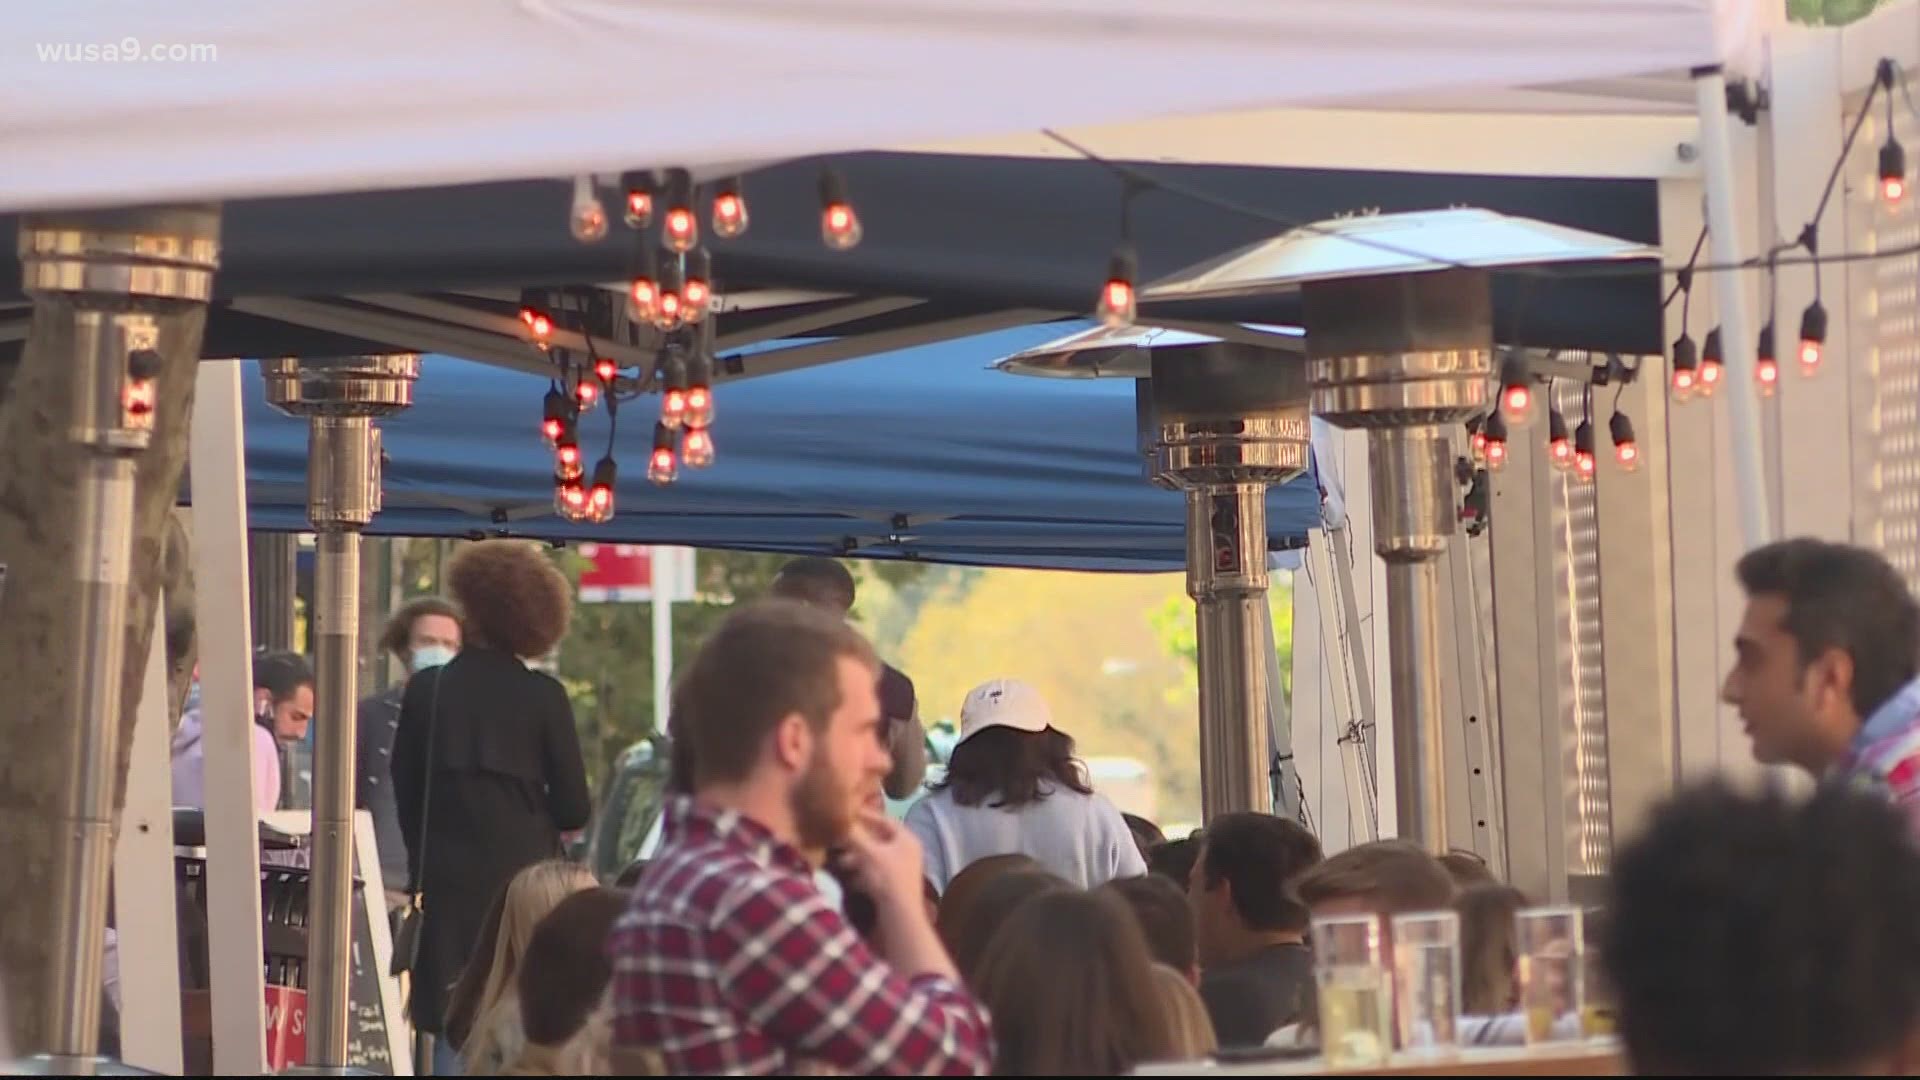 Patio heaters and gas tanks have become a hot commodity as health officials urge families to consider taking Thanksgiving outside instead of indoors.